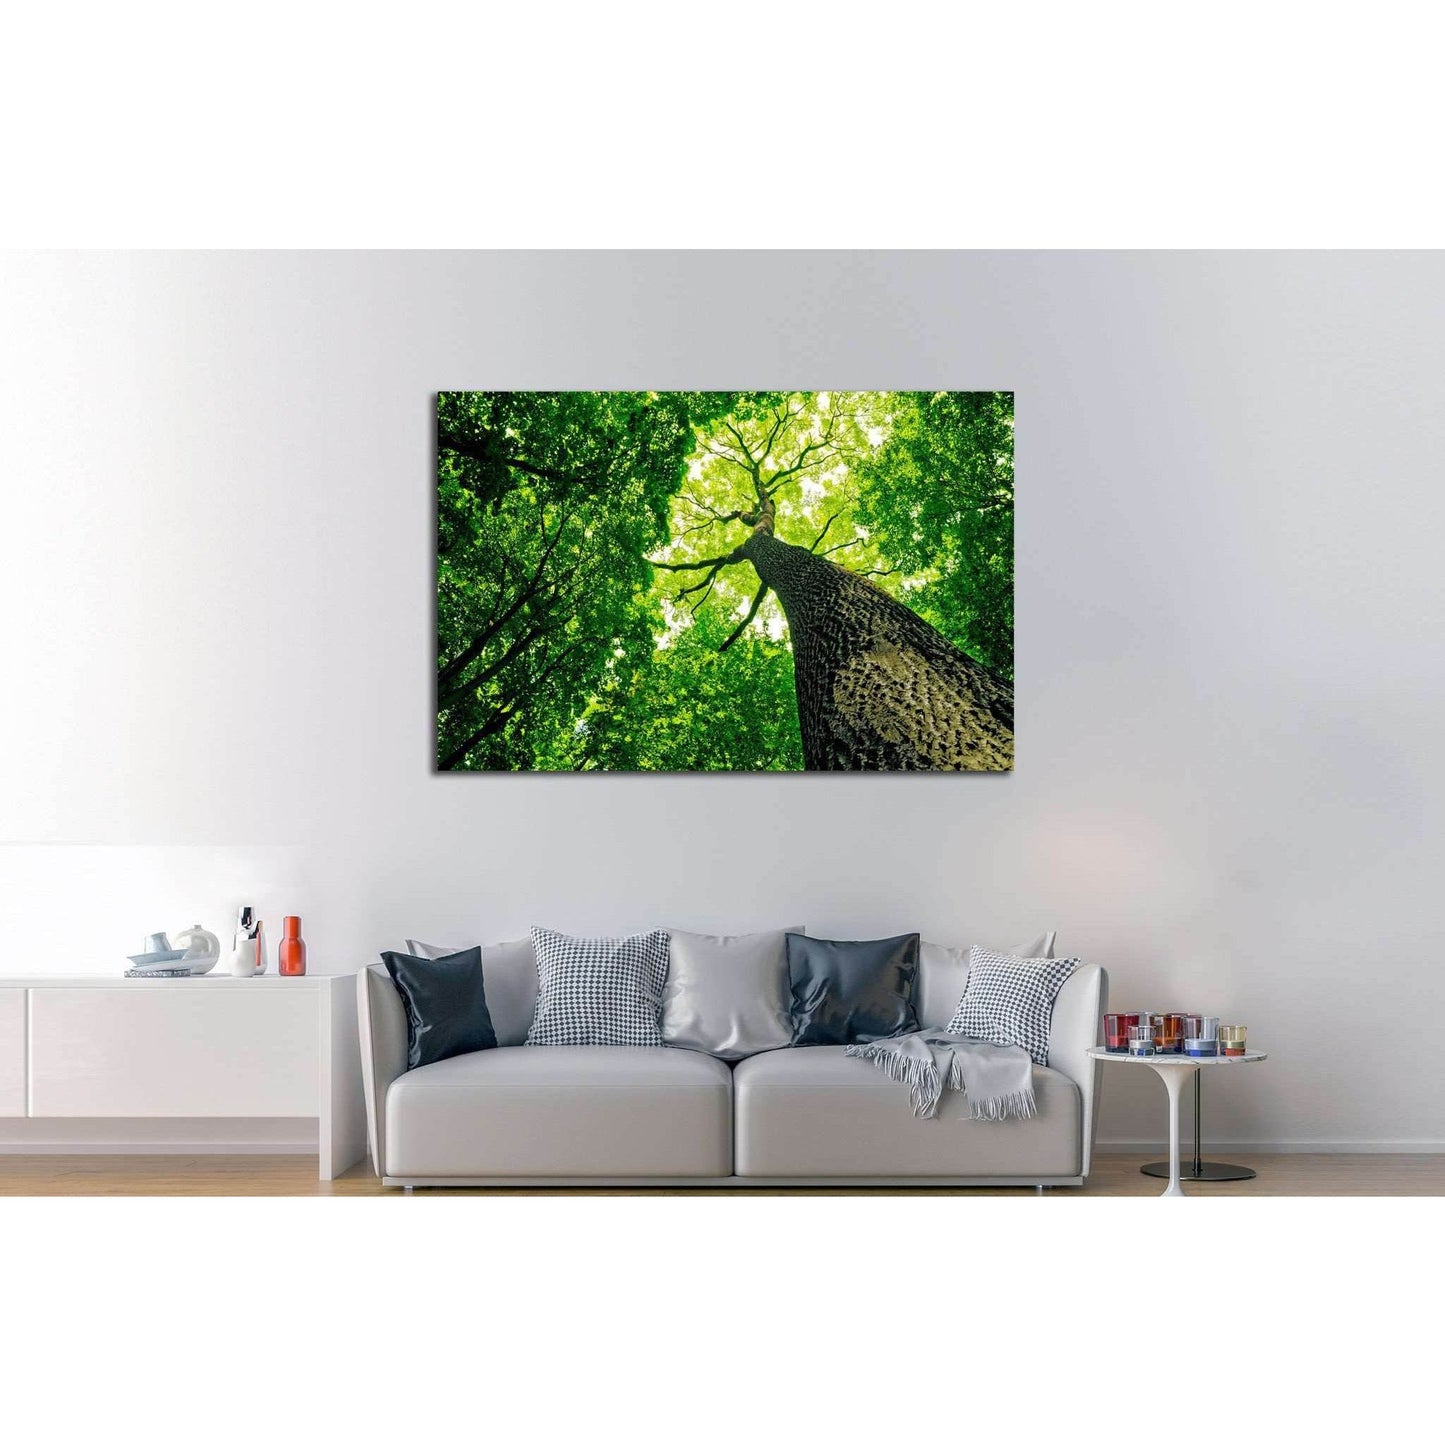 Upward Forest View Wall Art for Eco-Friendly InteriorsThis canvas print features an upward view of a towering tree, its trunk leading to a canopy of vibrant green leaves against the sky. This perspective celebrates the grandeur and vitality of nature, mak